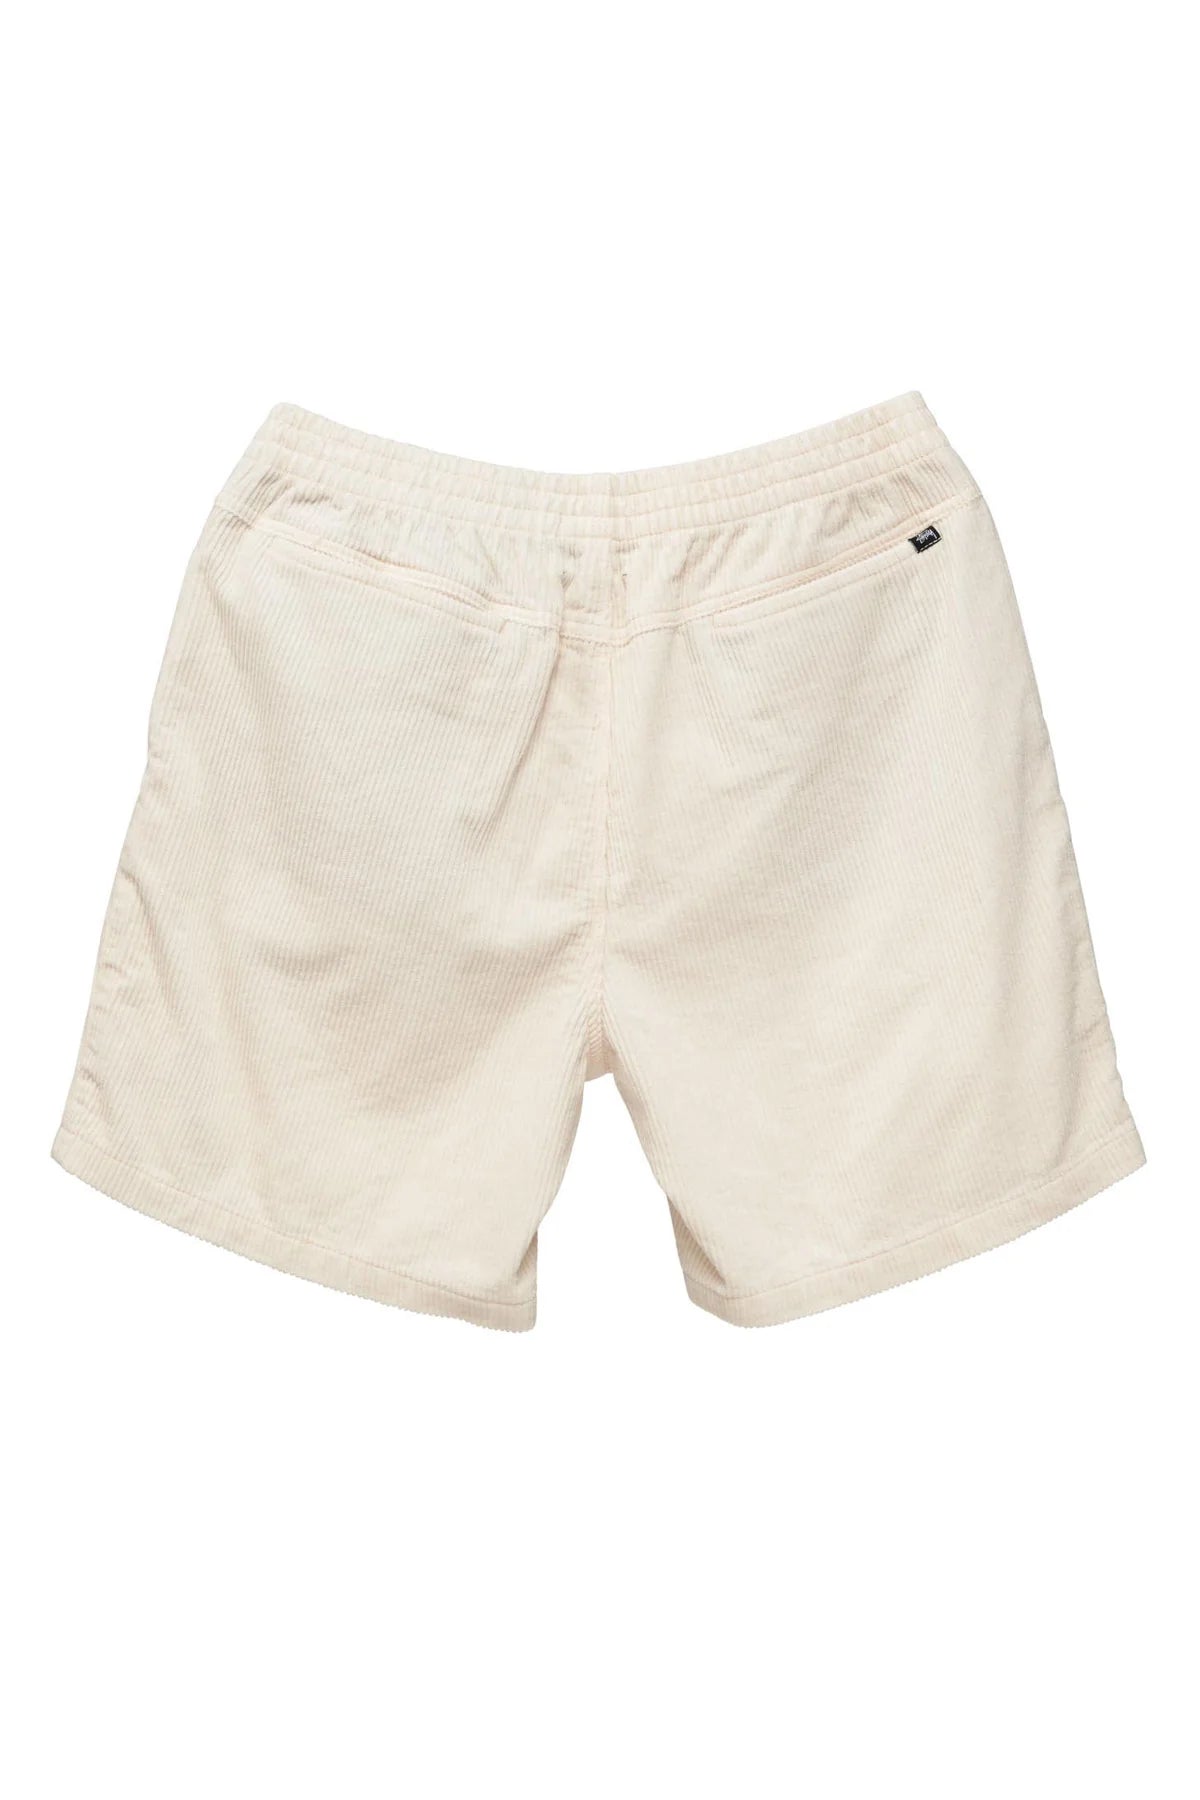 Stussy wide wale cord beachshort - pigment washed white